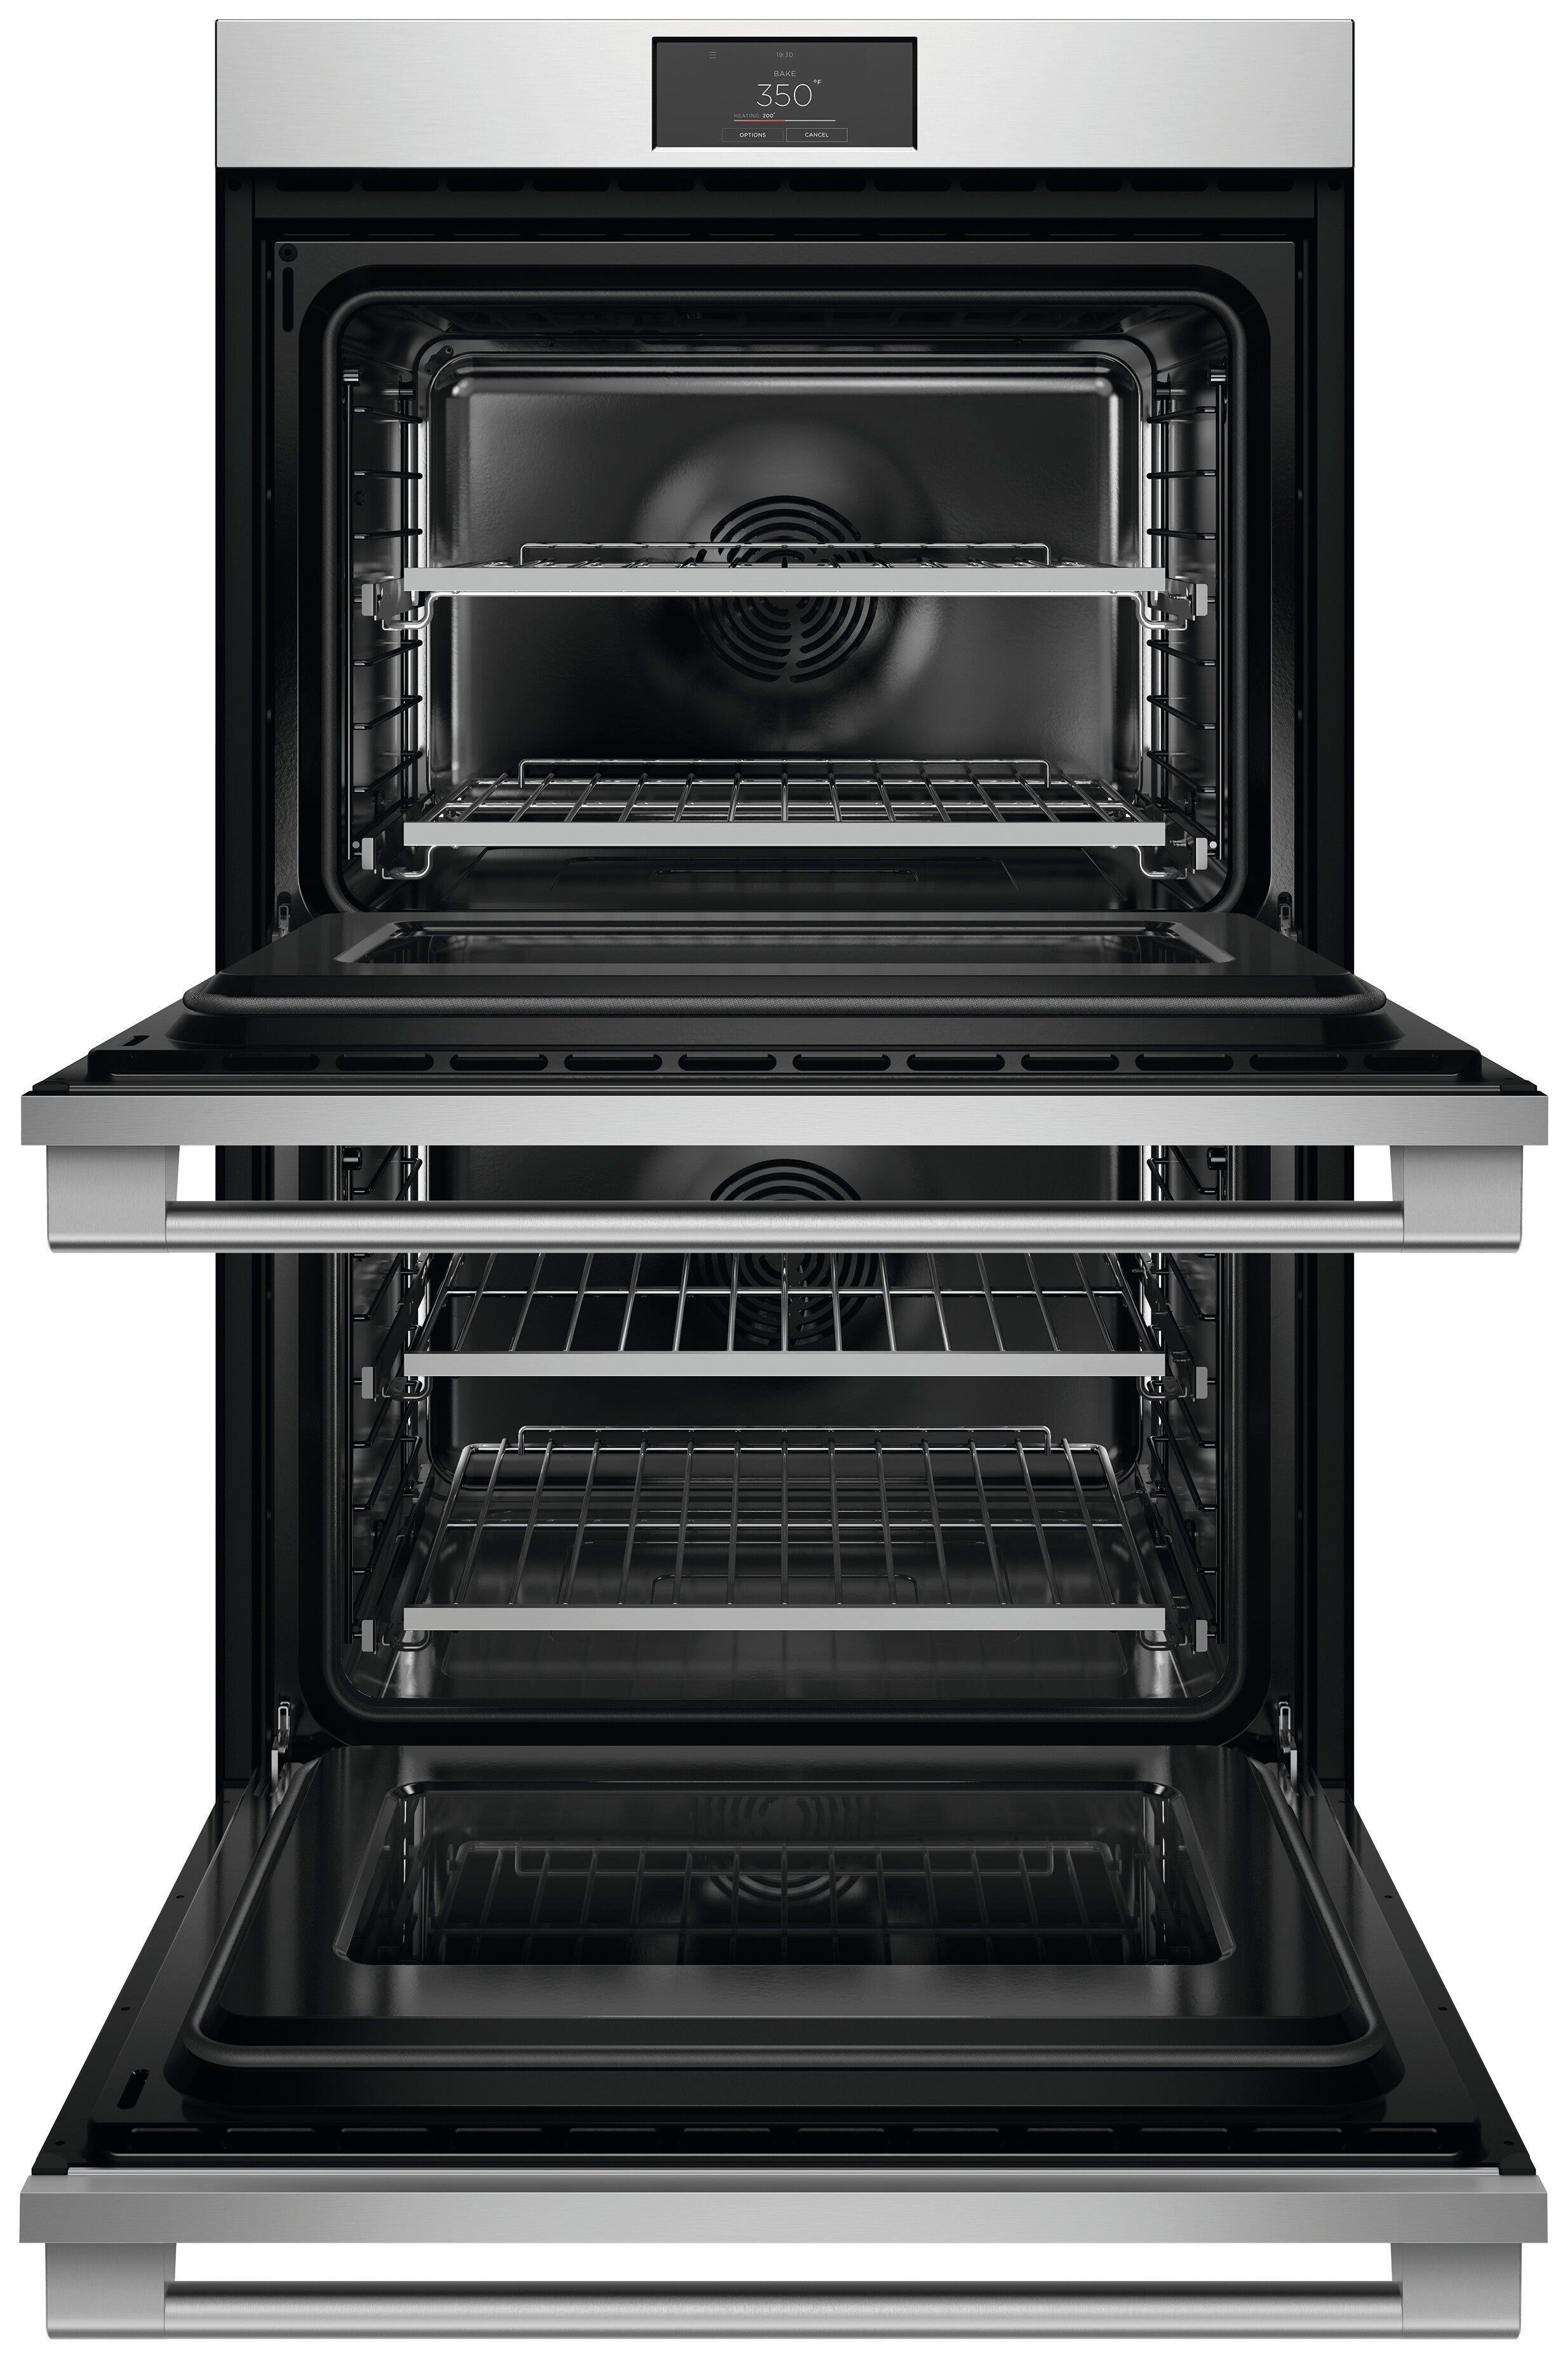 Fisher & Paykel - 8.2 cu. ft Double Wall Oven in Stainless - OB30DPPTX1